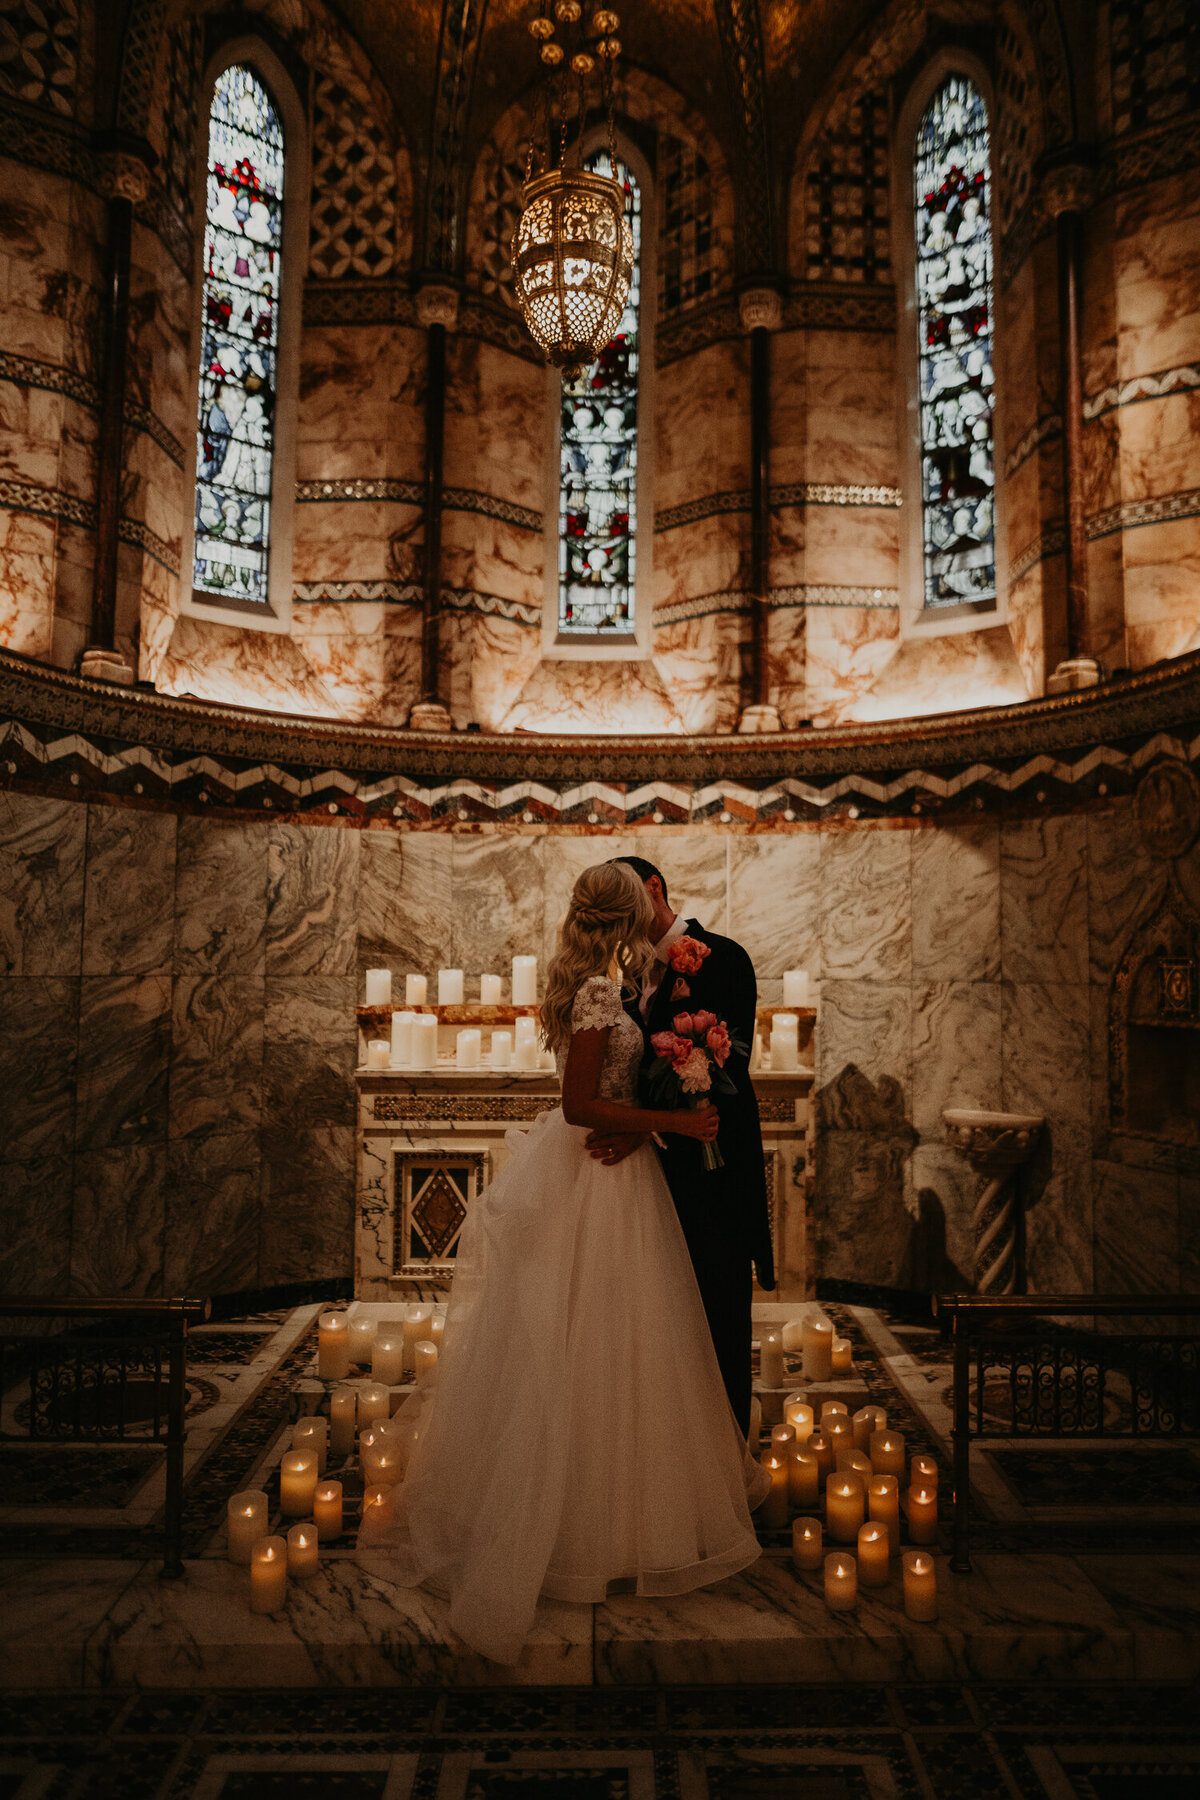 A couple kiss amongst the candles at Fitzrovia Chapel in London.